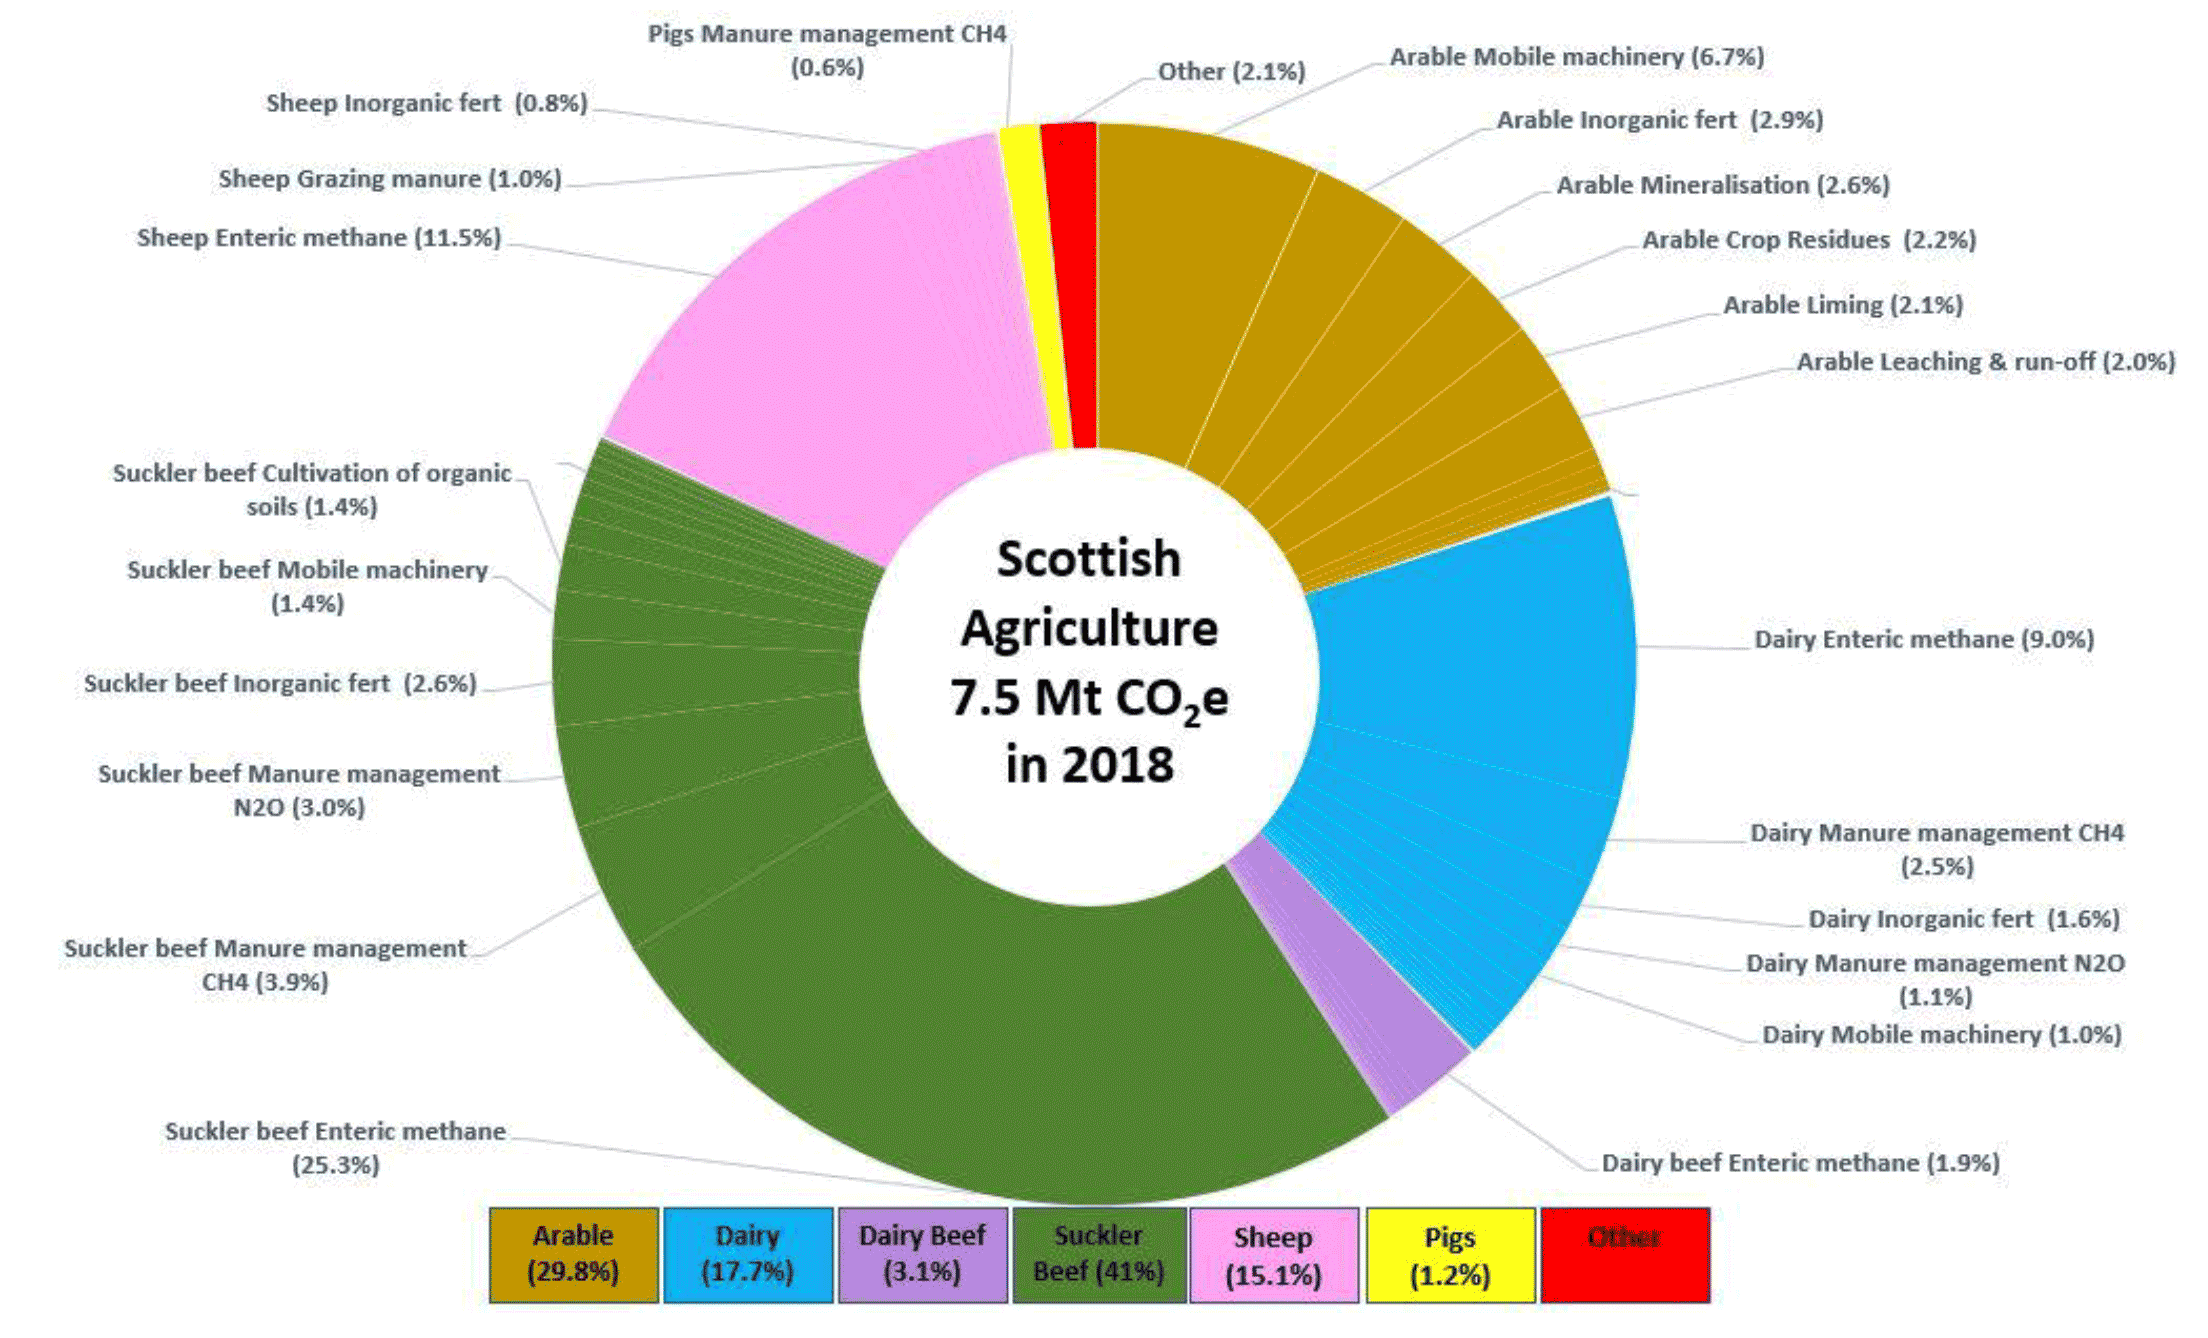 A donut chart showing sources of emissions by sector and source. The largest proportion of emissions comes from suckler beef (41%), of which the largest source is enteric methane. The next largest source is arable (30%), of which the largest source is mobile machinery. Dairy emits 18% of agriculture emissions, sheep 15%, dairy beef 3%, and pigs 1%. 